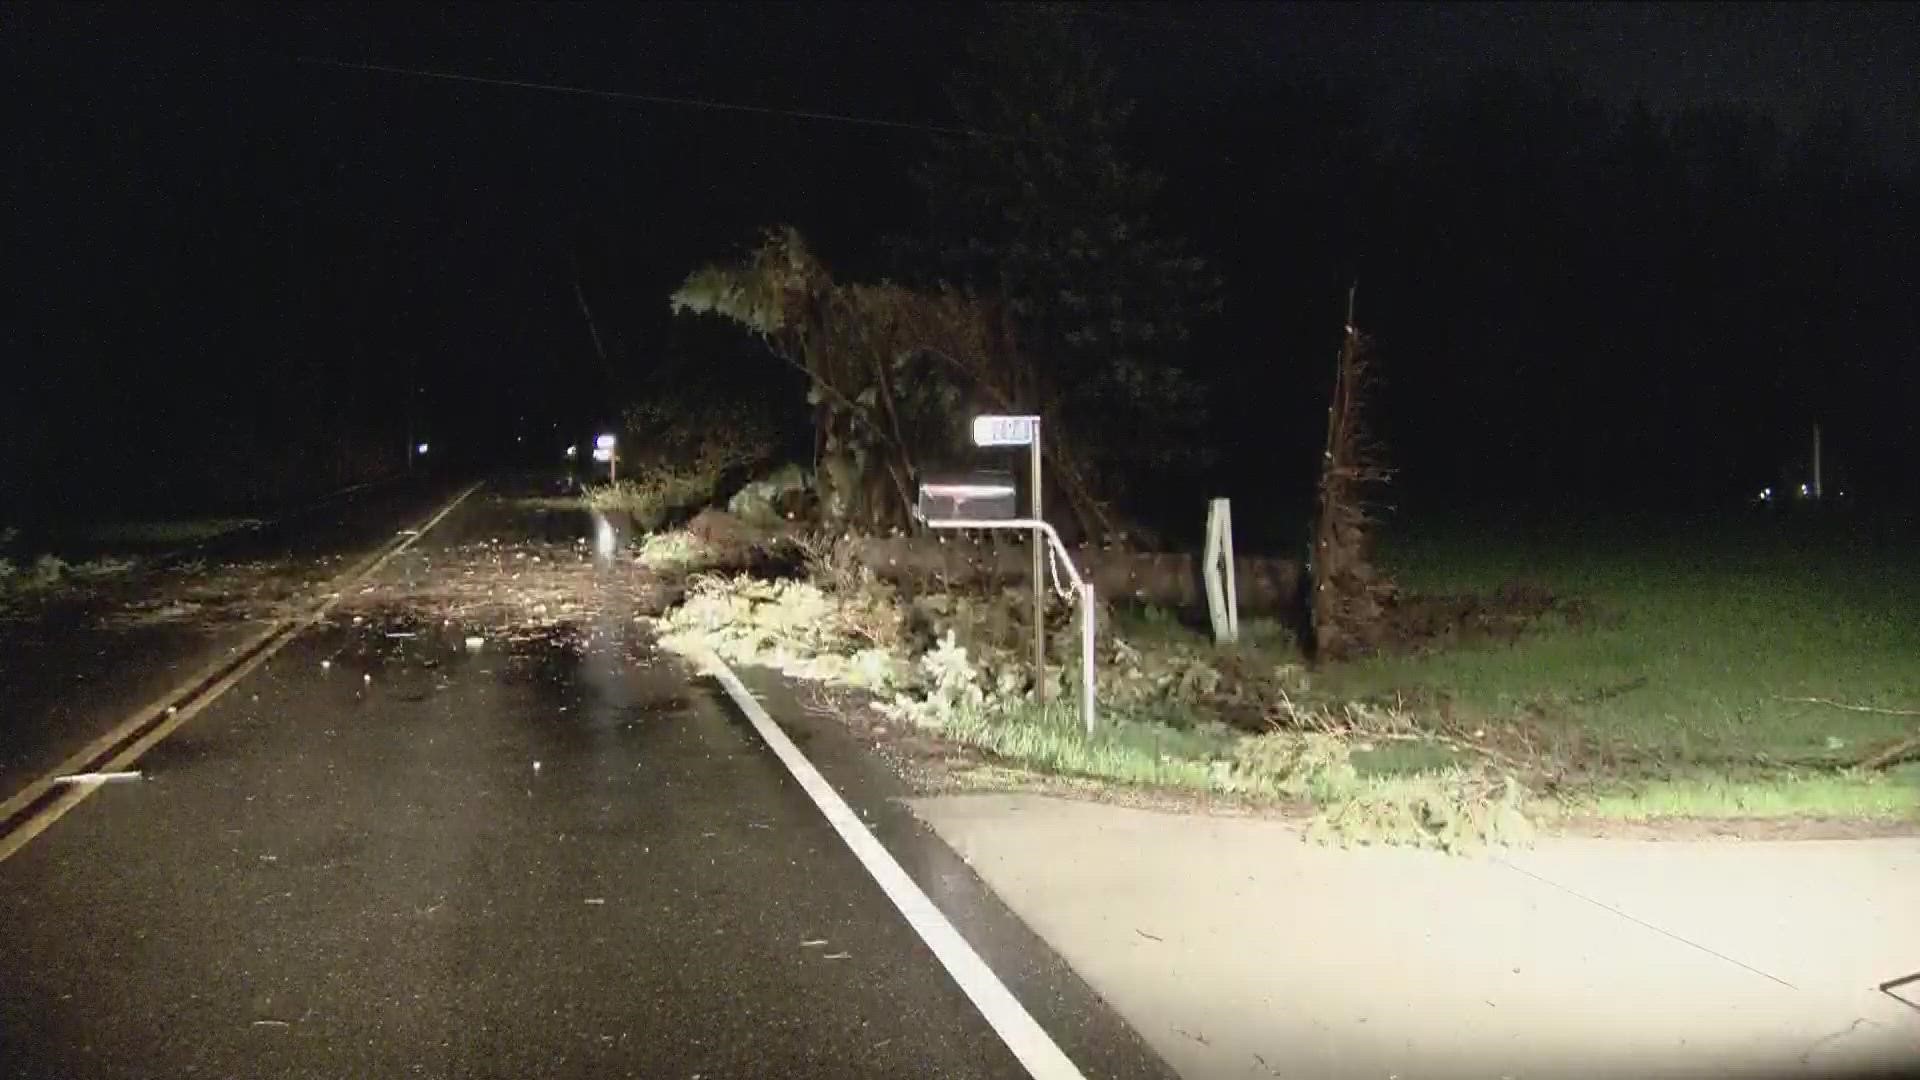 A second round of severe weather hit Minnesota on Thursday, resulting in significant damage in western parts of the state.